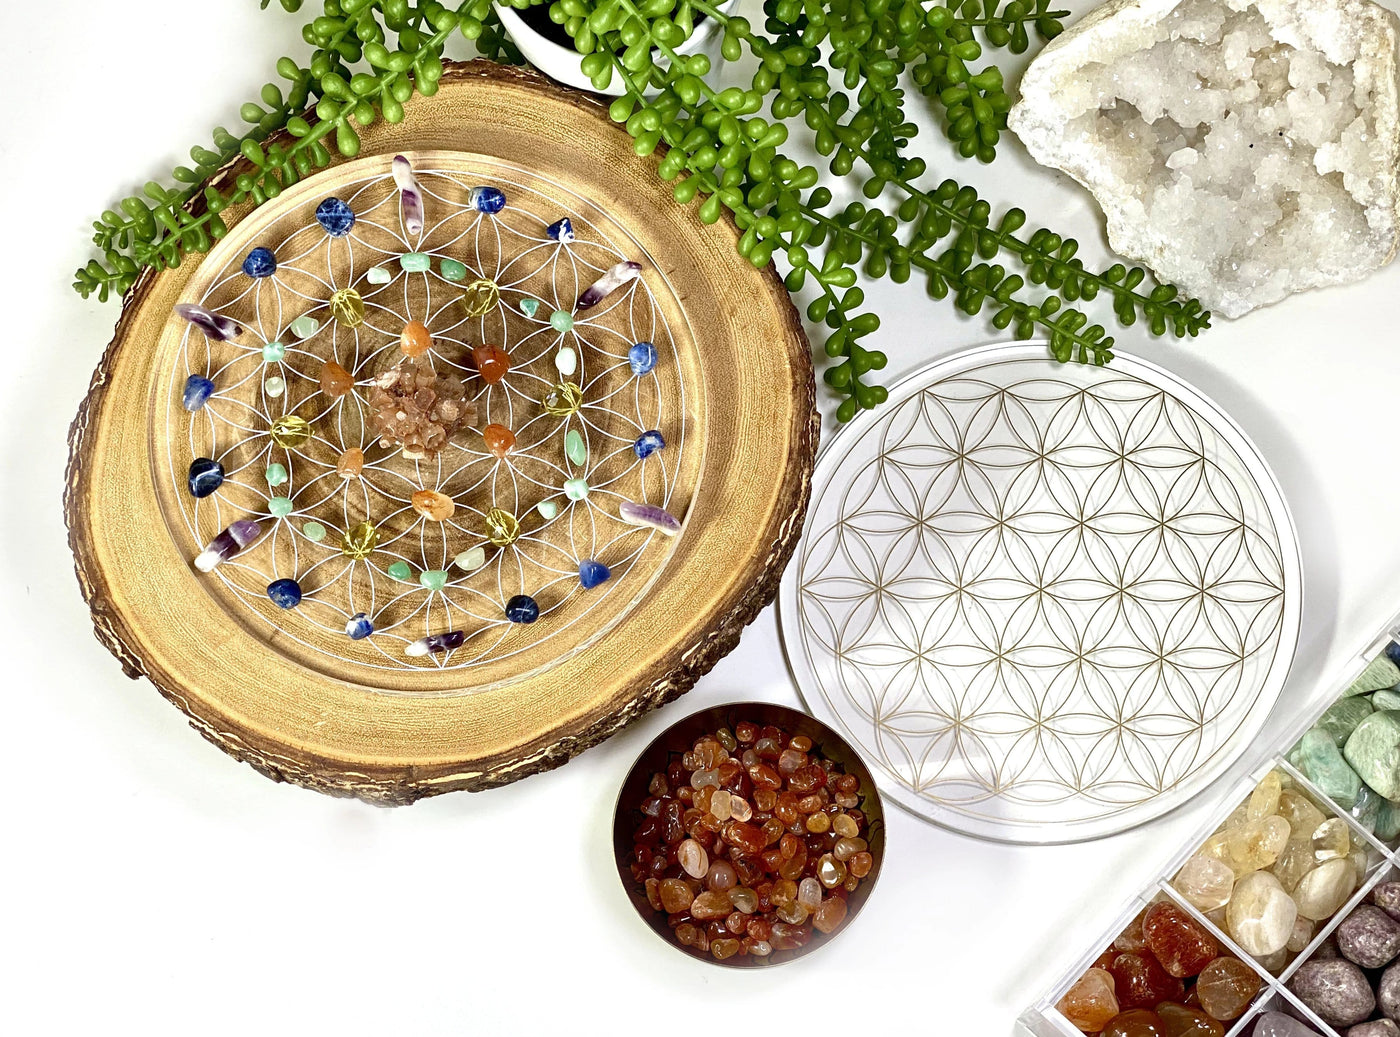 Crystal Grid Flower of Life Acrylic Grid with tumbled stones on top (stones not included) and a crystal grid flower of life acrylic grid with nothing on top